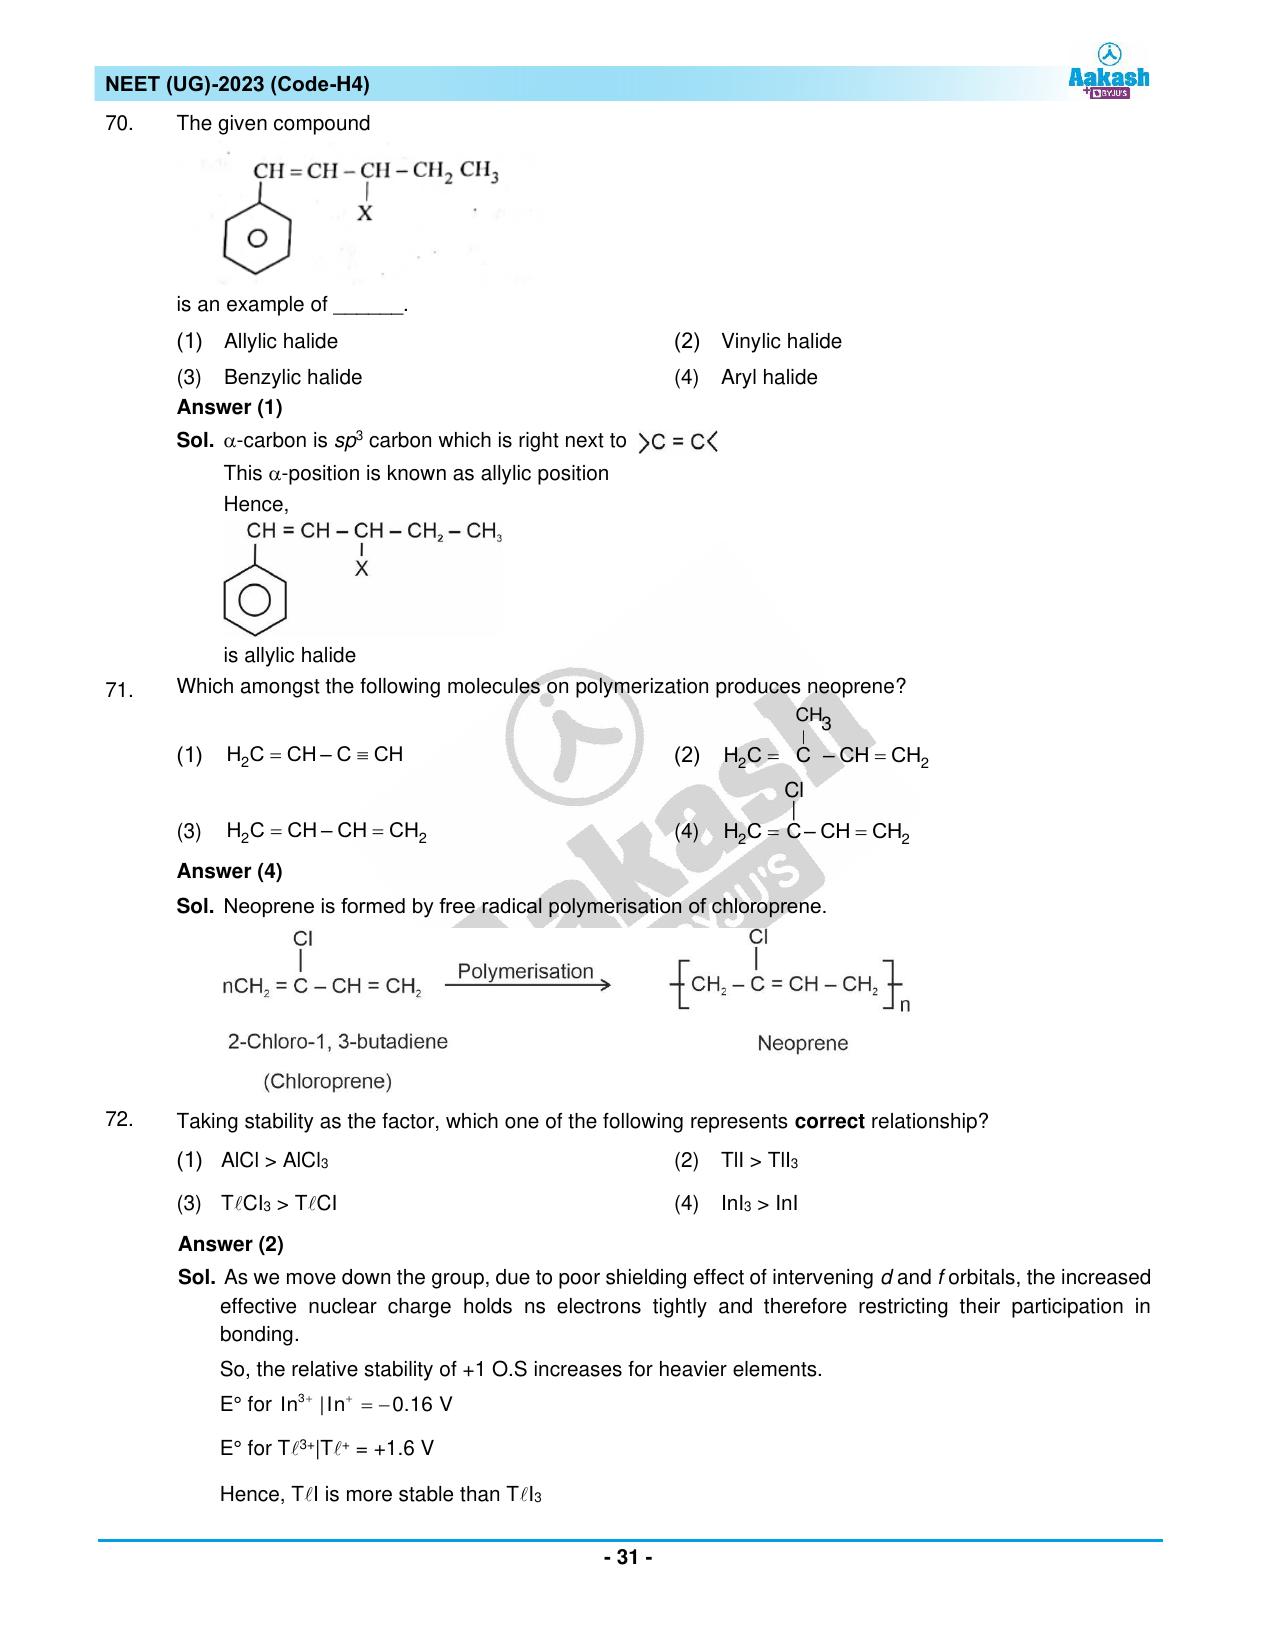 NEET 2023 Question Paper H4 - Page 31